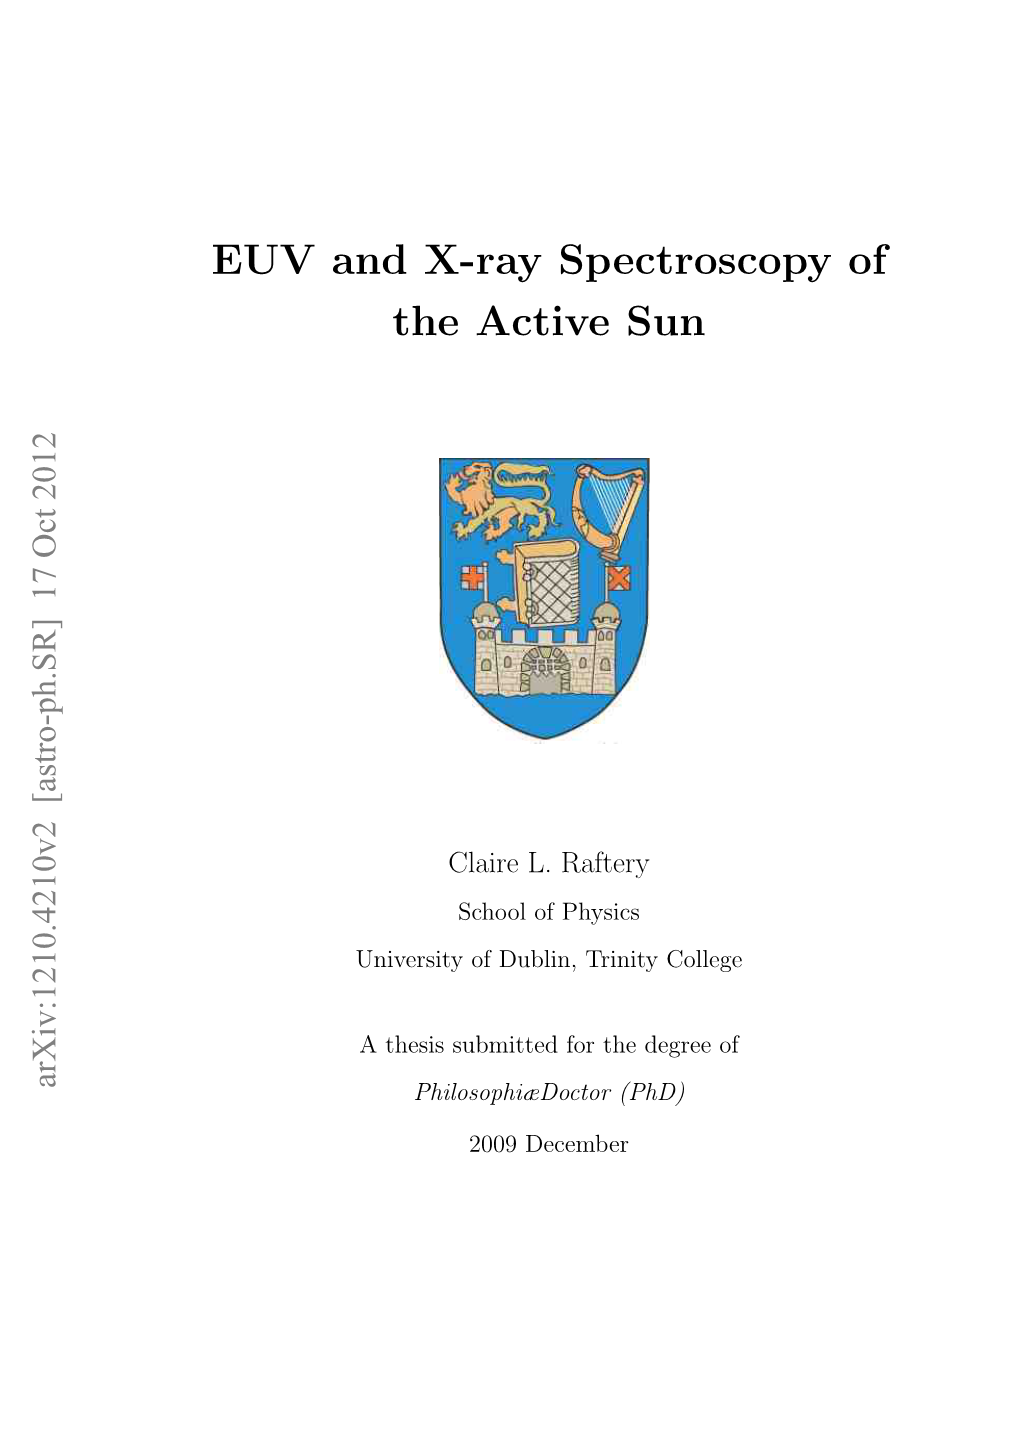 EUV and X-Ray Spectroscopy of the Active Sun